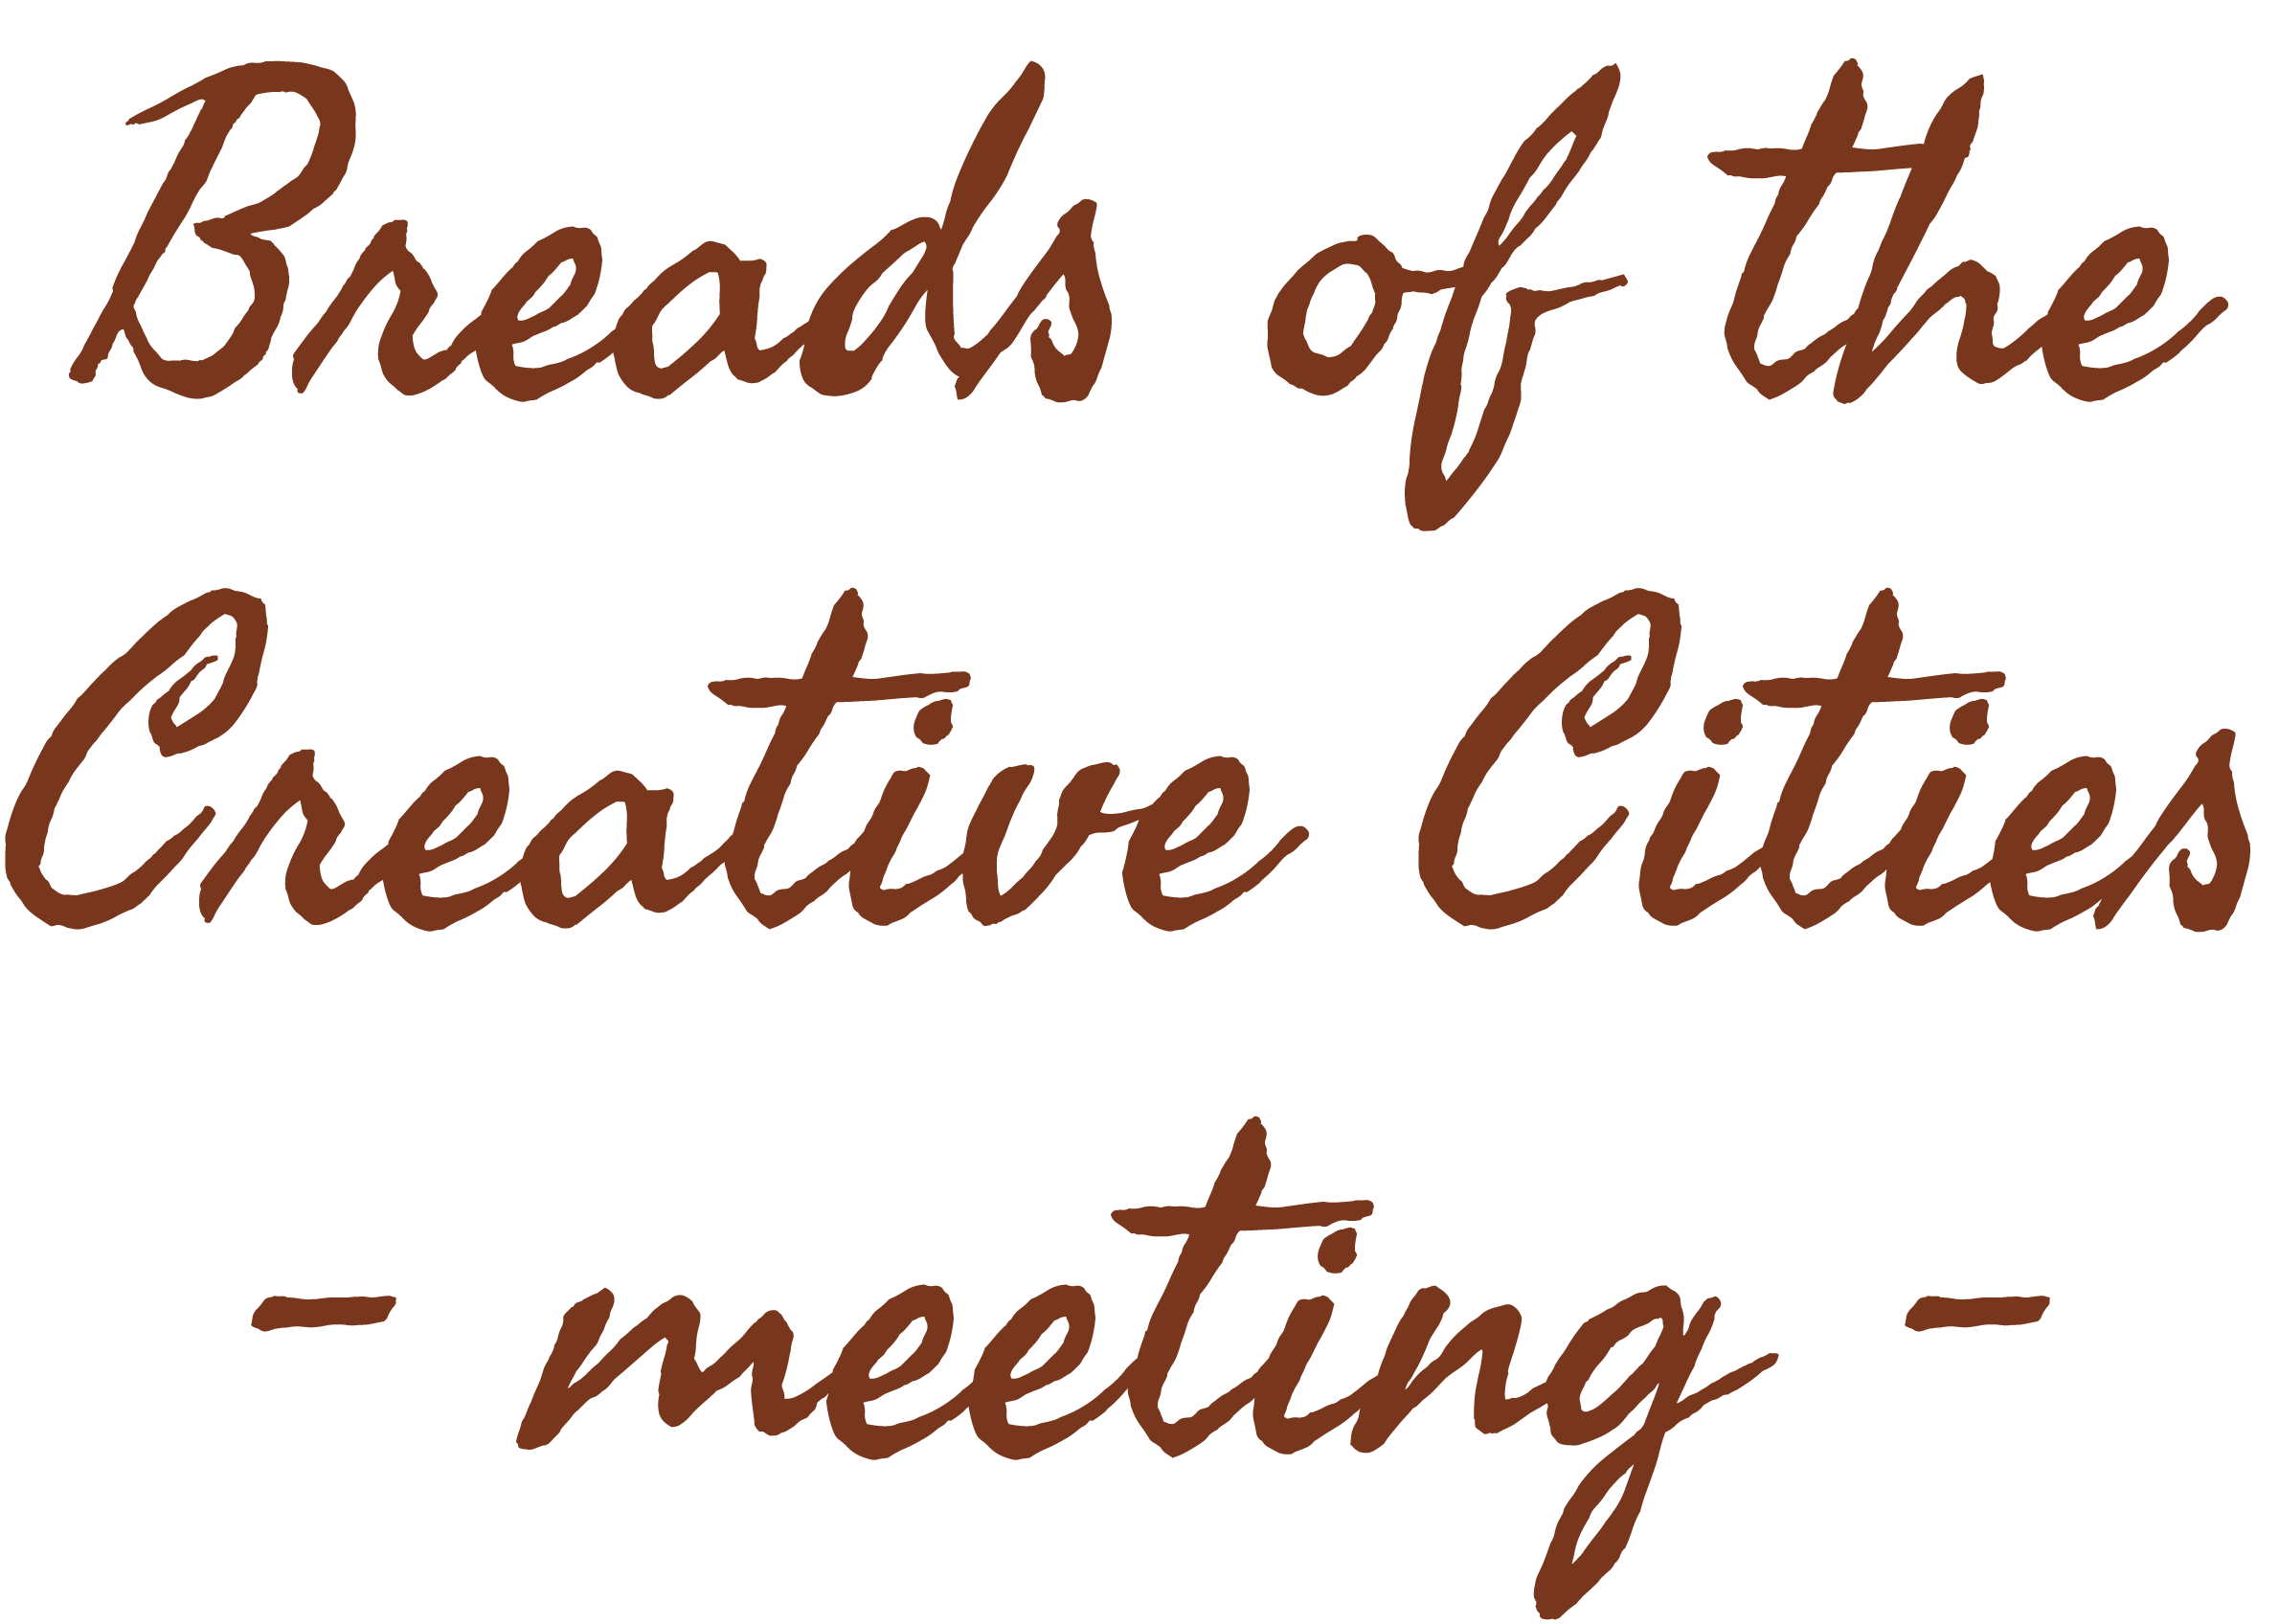 Breads of the Creative Cities meeting logo